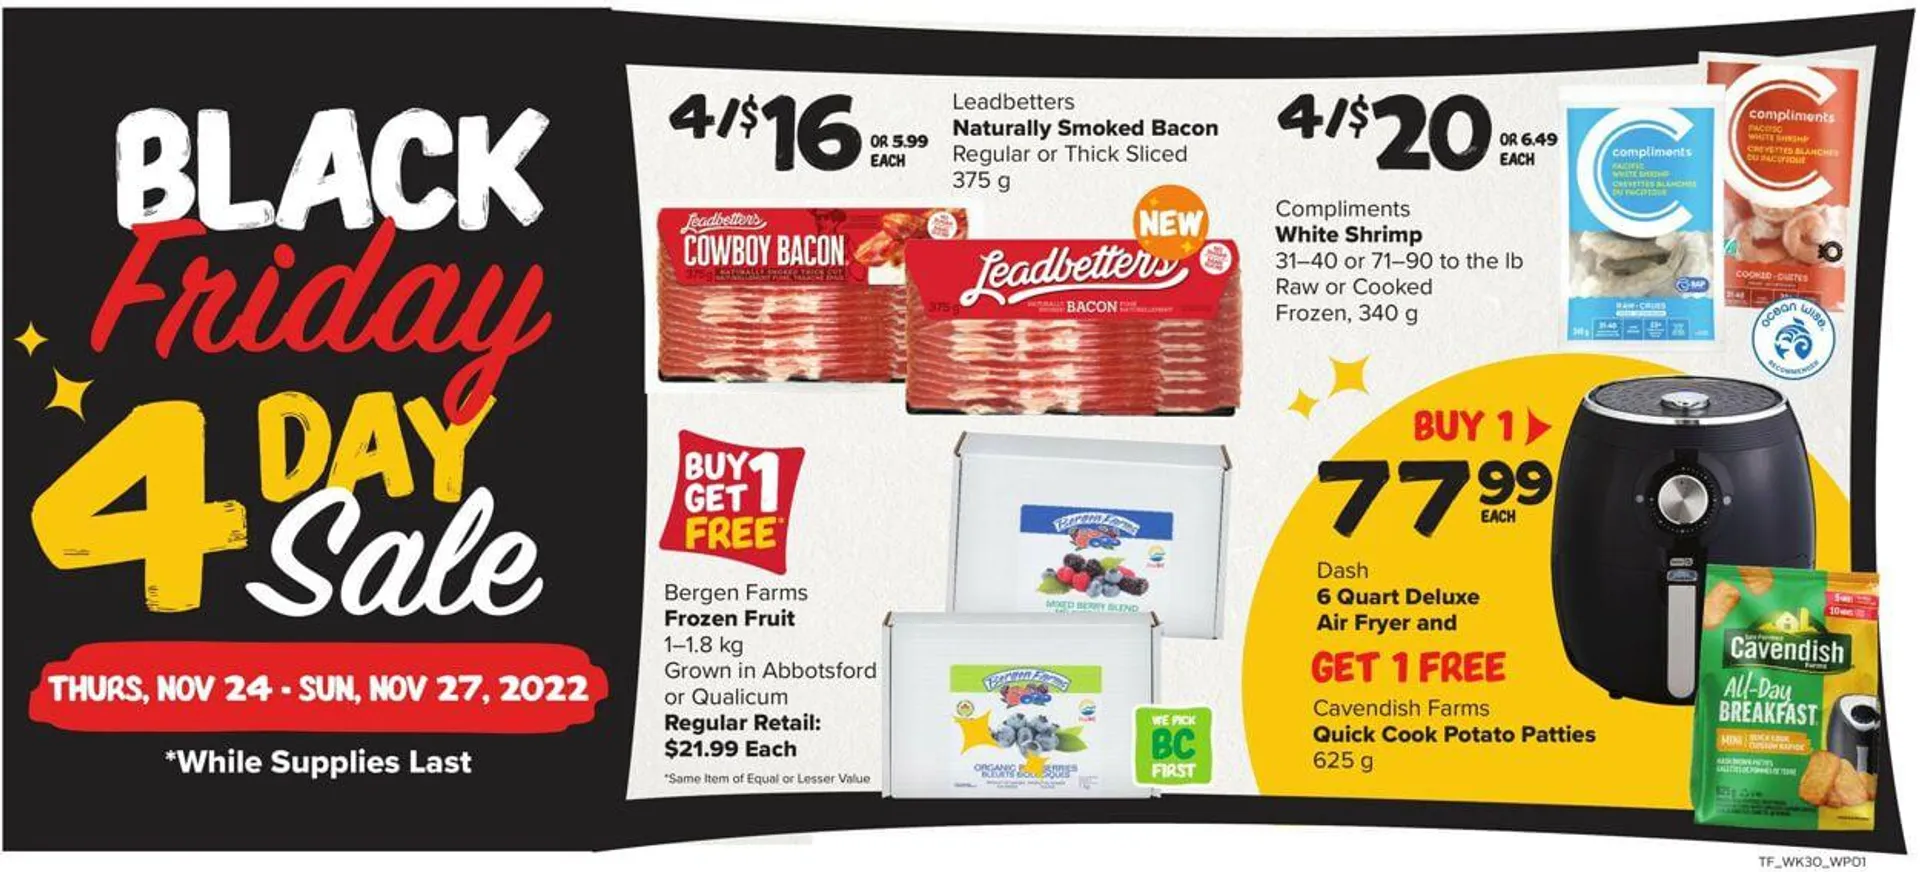 Thrifty Foods Current flyer - 1